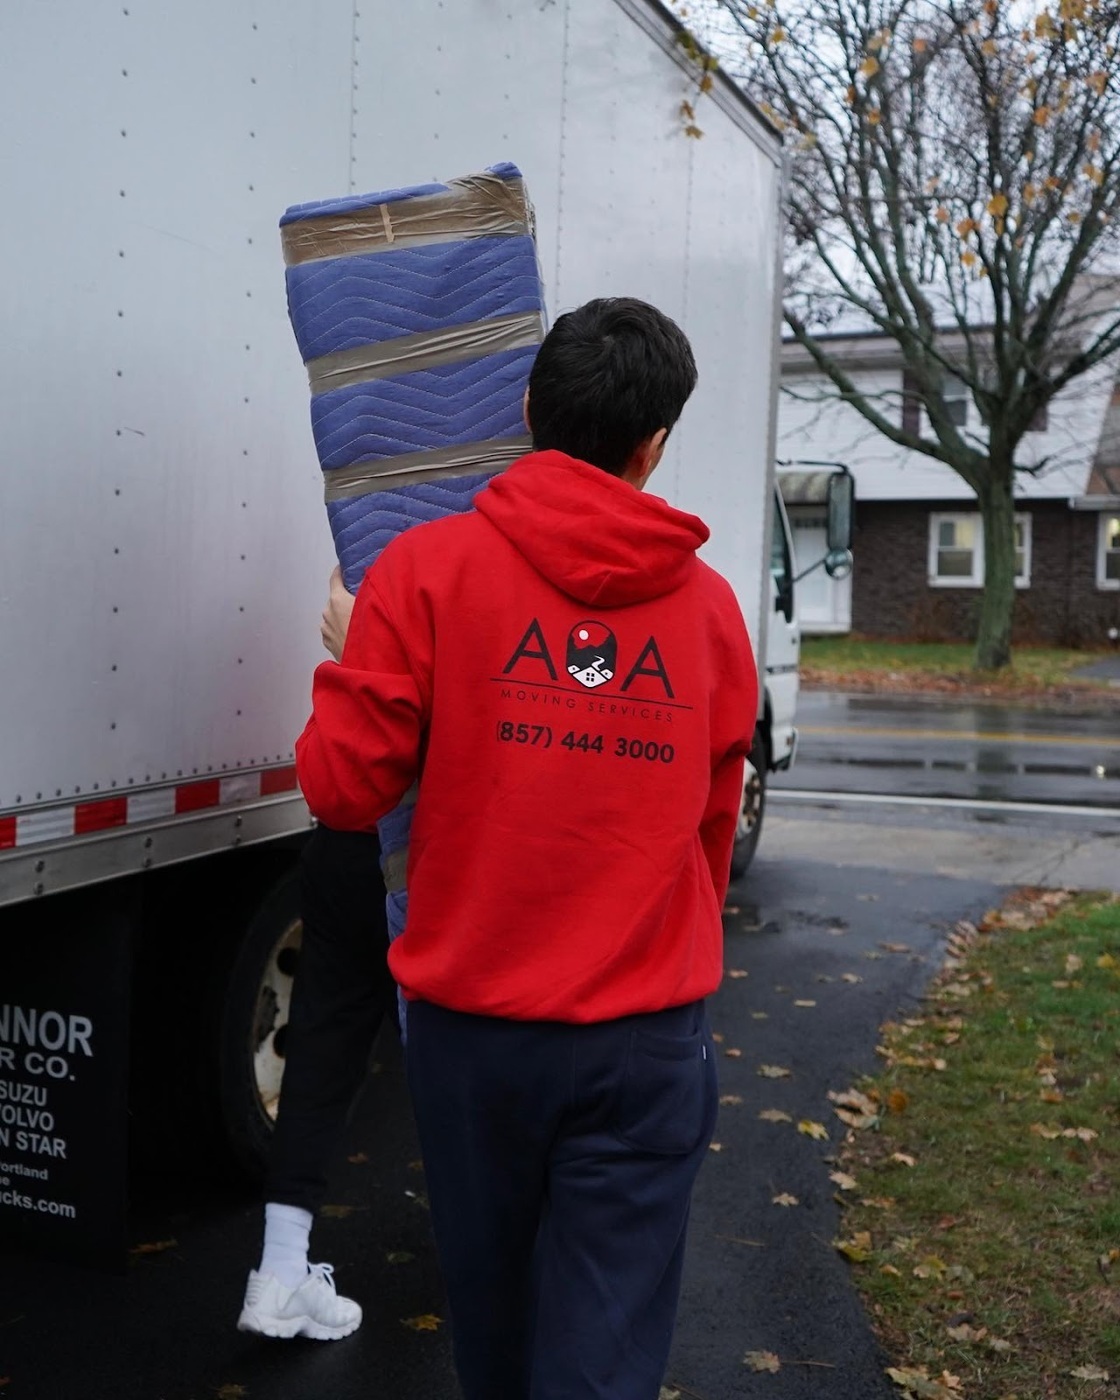 Established in 2020, the fully insured and licensed company has become the trusted movers for the people of Boston and surrounding areas in a short period because of its impeccable services, fair pricing, and 24/7 customer support.